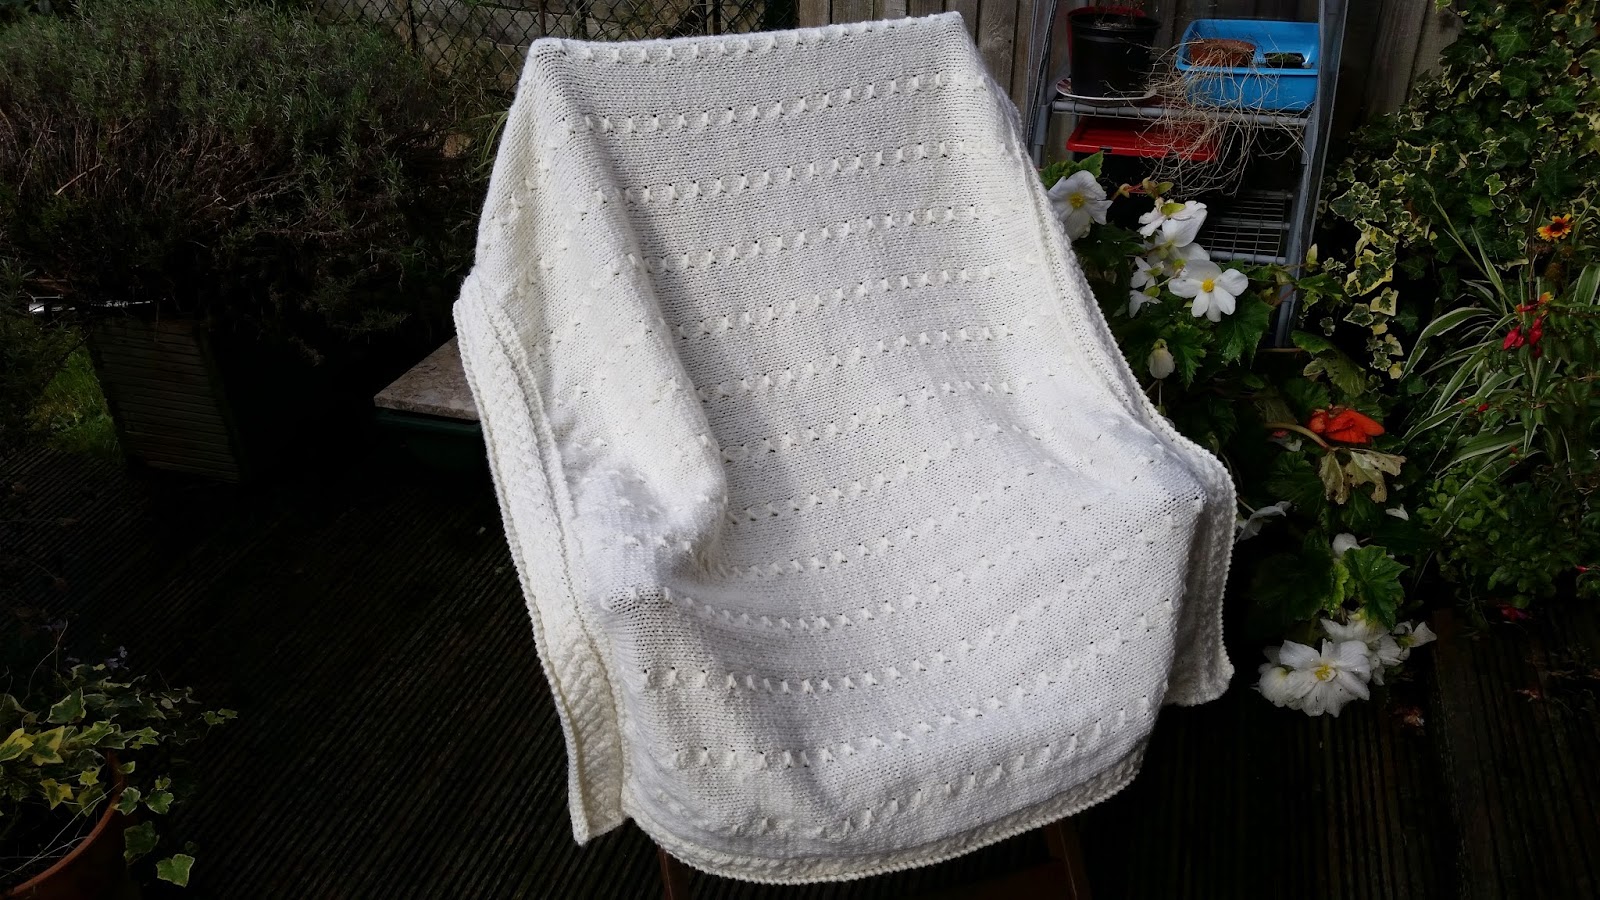 A Knit, Crochet & Craft Addict: Cable & Cream finally finished